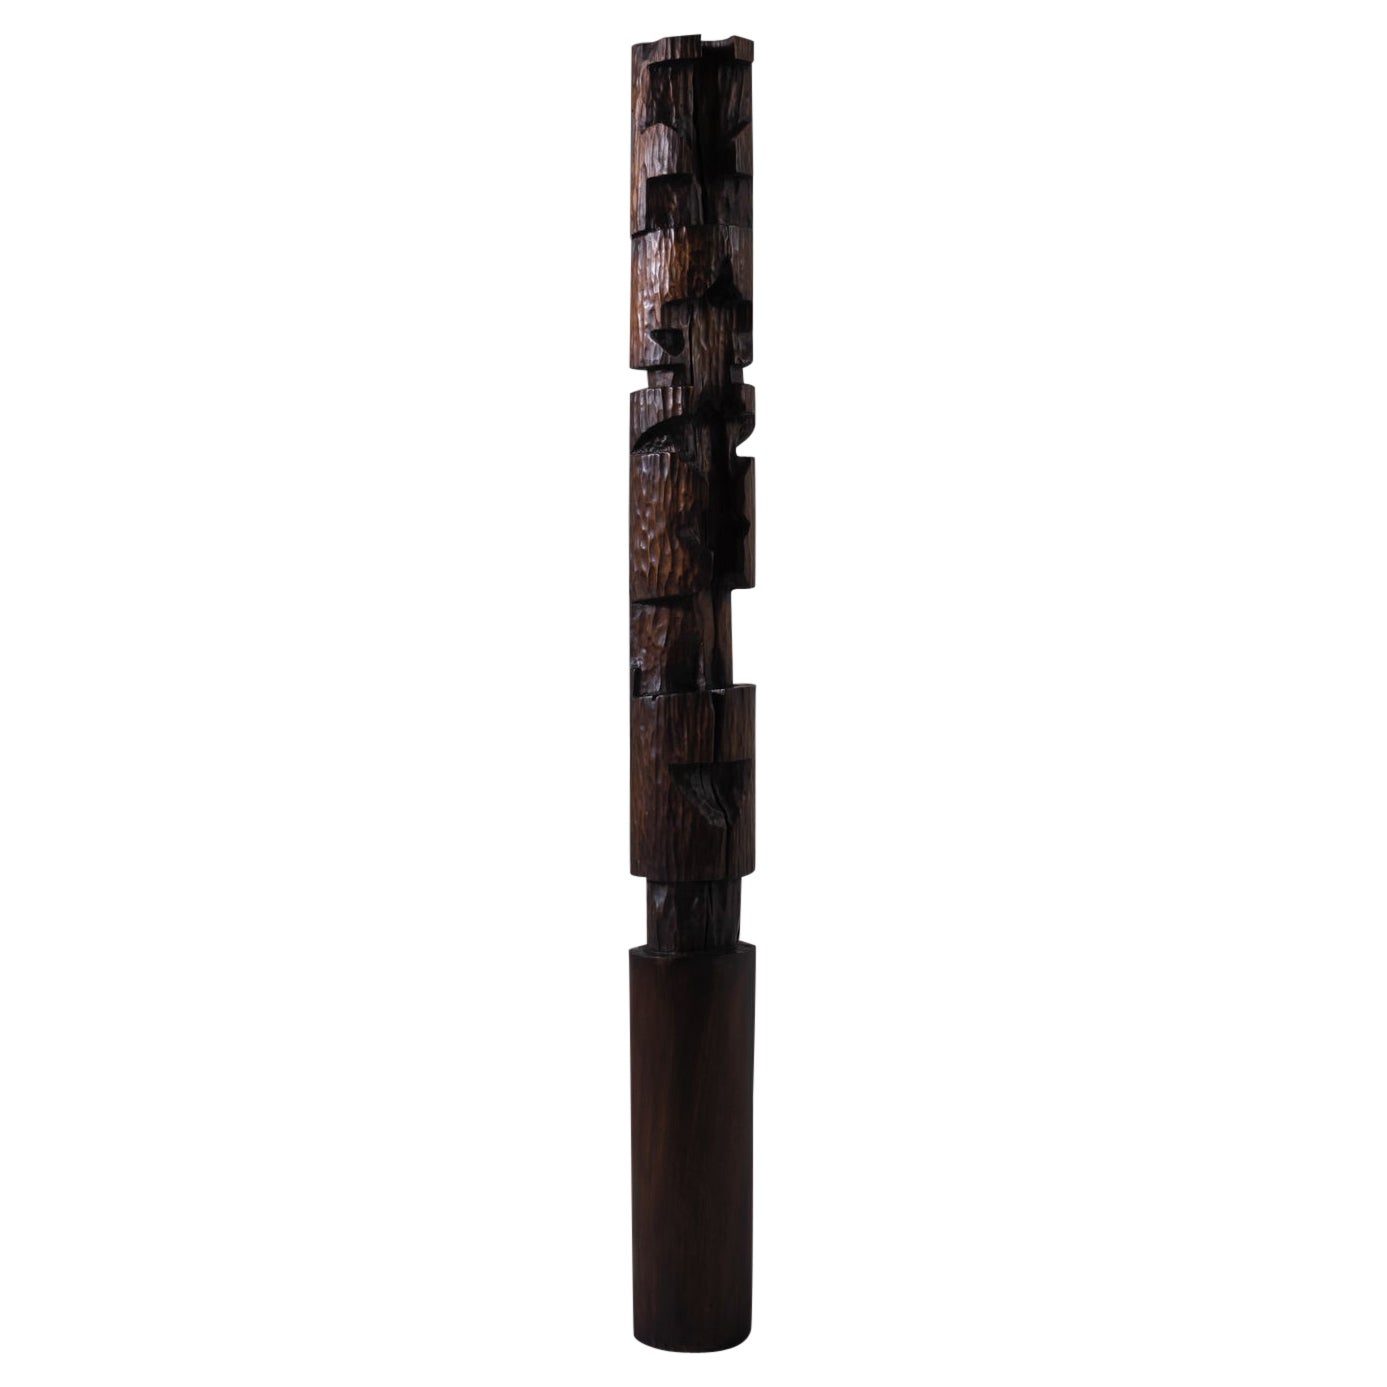 Abstract wooden Totem sculpture by Frans Nielen, 1970s